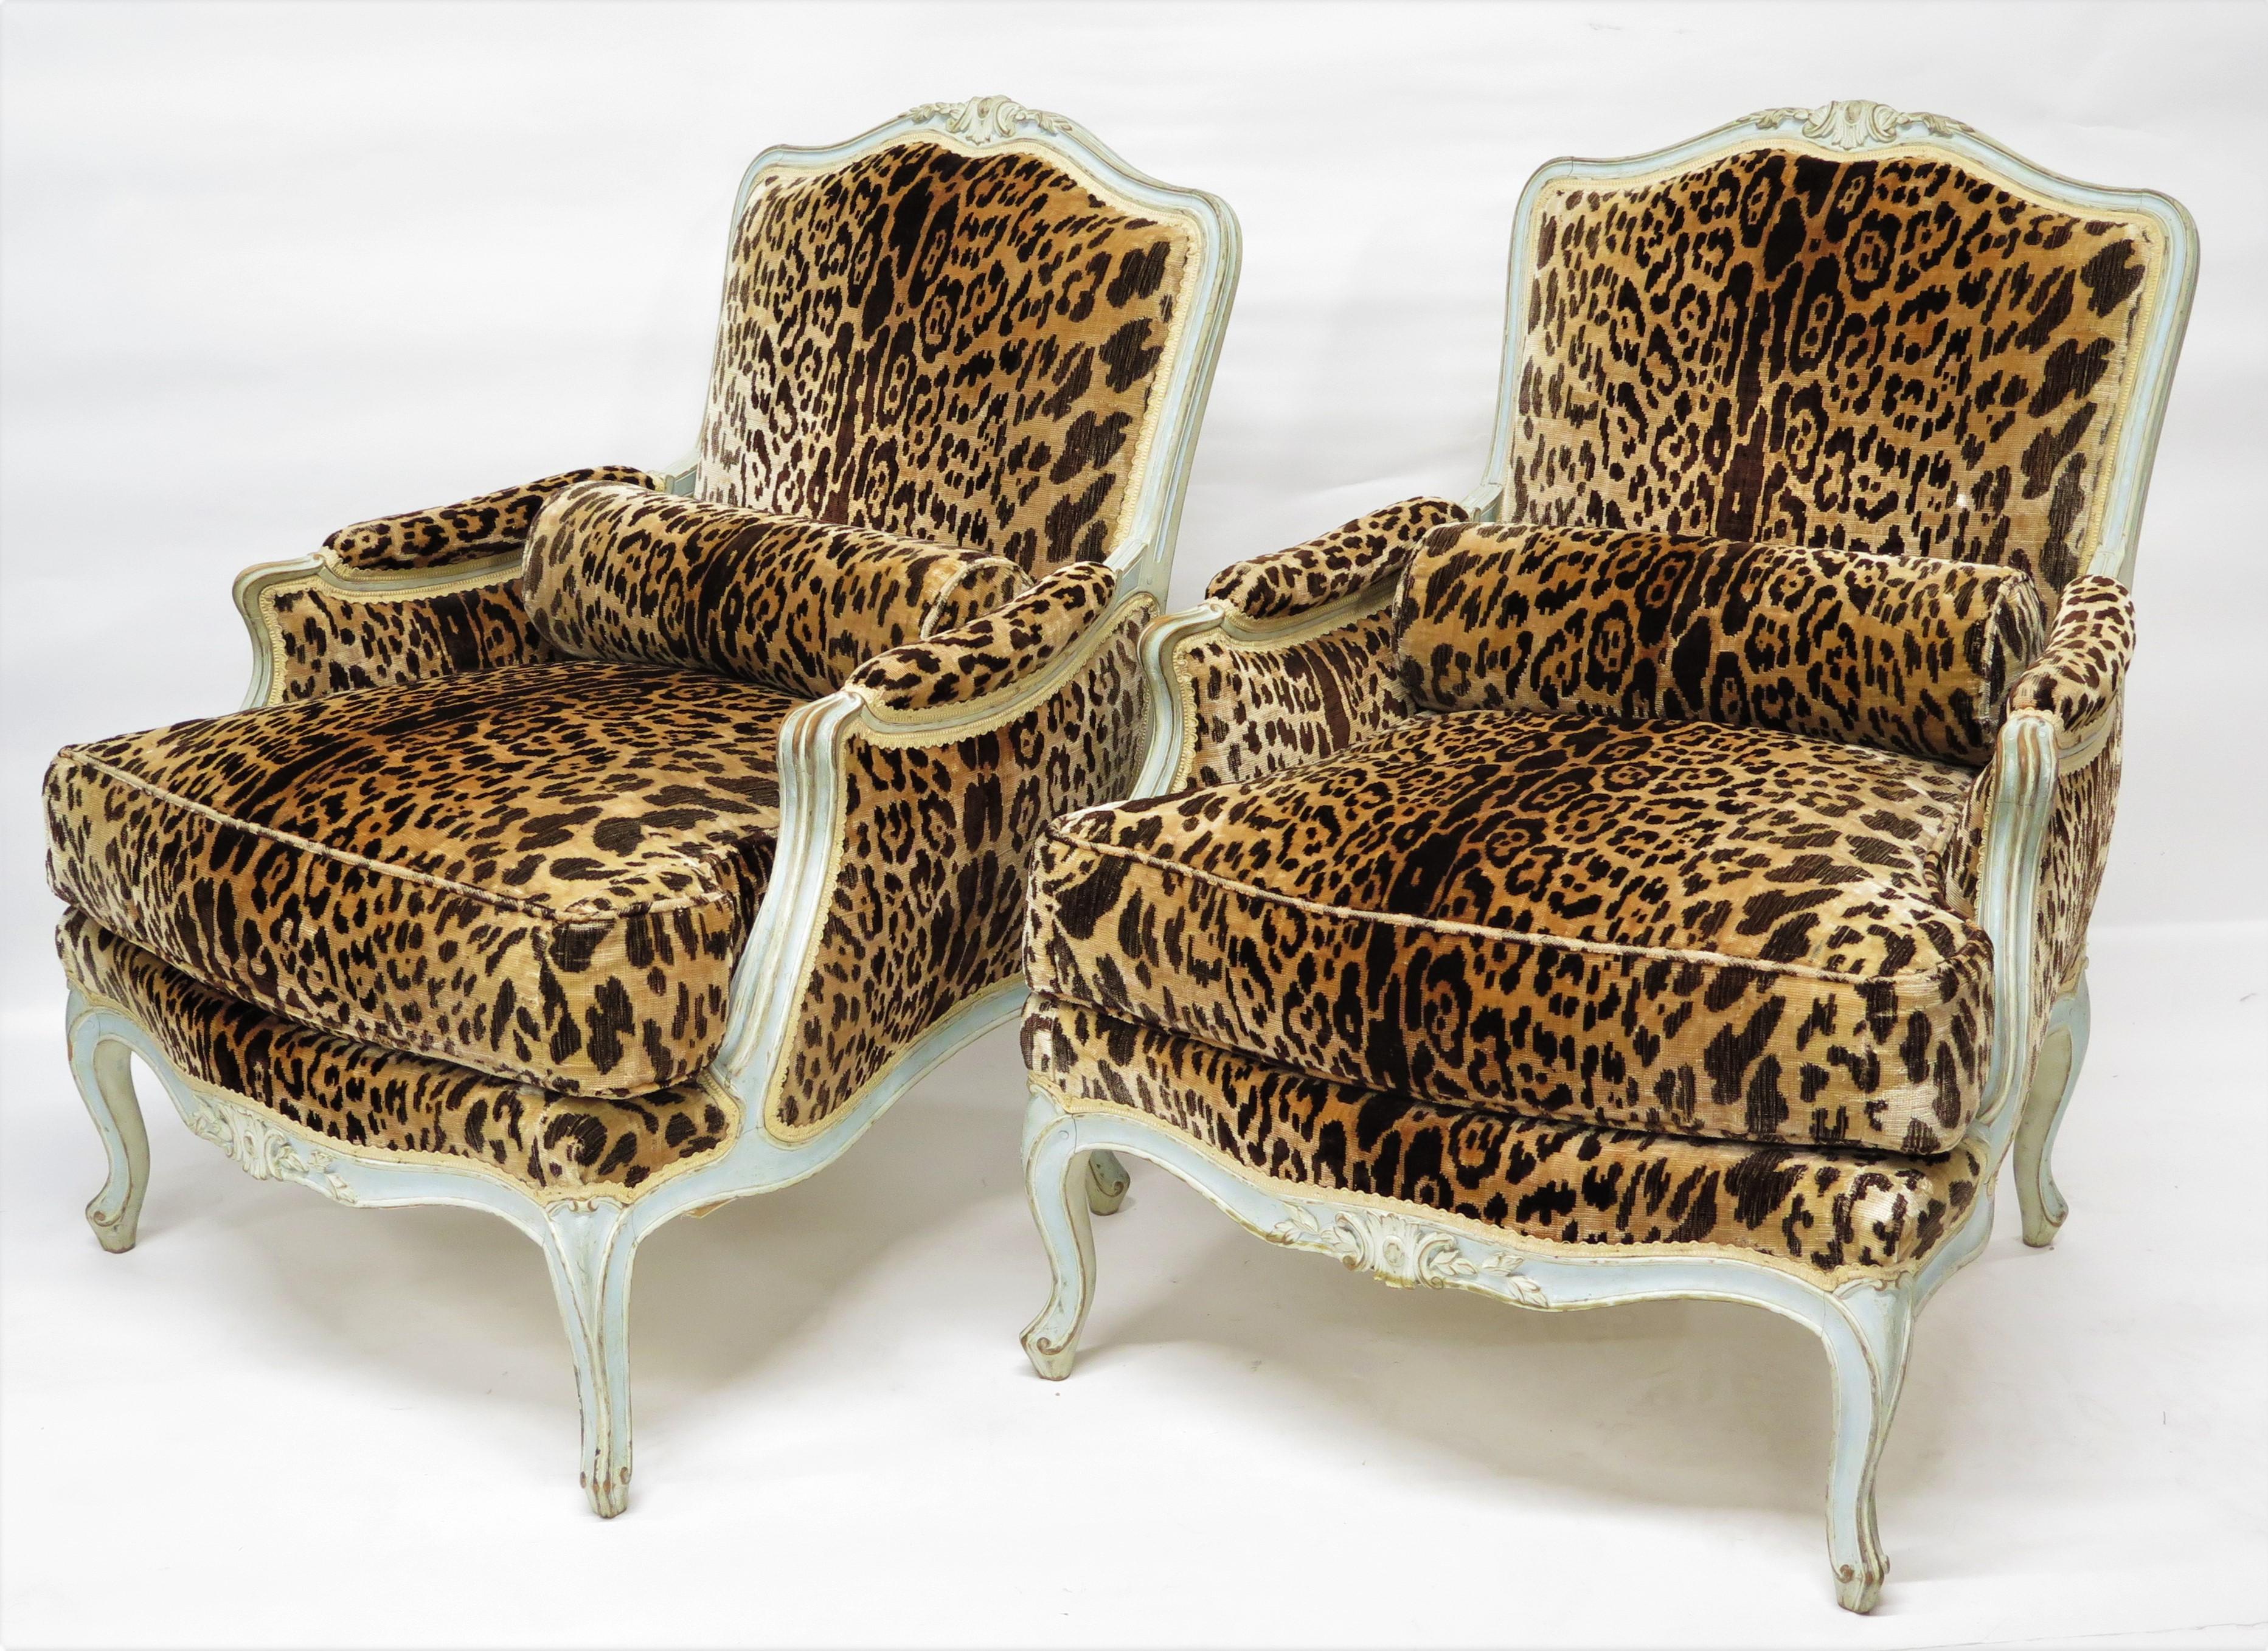 pair of Louis XV-Style bergères carved and painted frames, generously proportioned, commodious, beautifully upholstered in vintage leopard silk velvet, loose seat cushion, bolster-style back pillow, France, late 19th / early 20th century